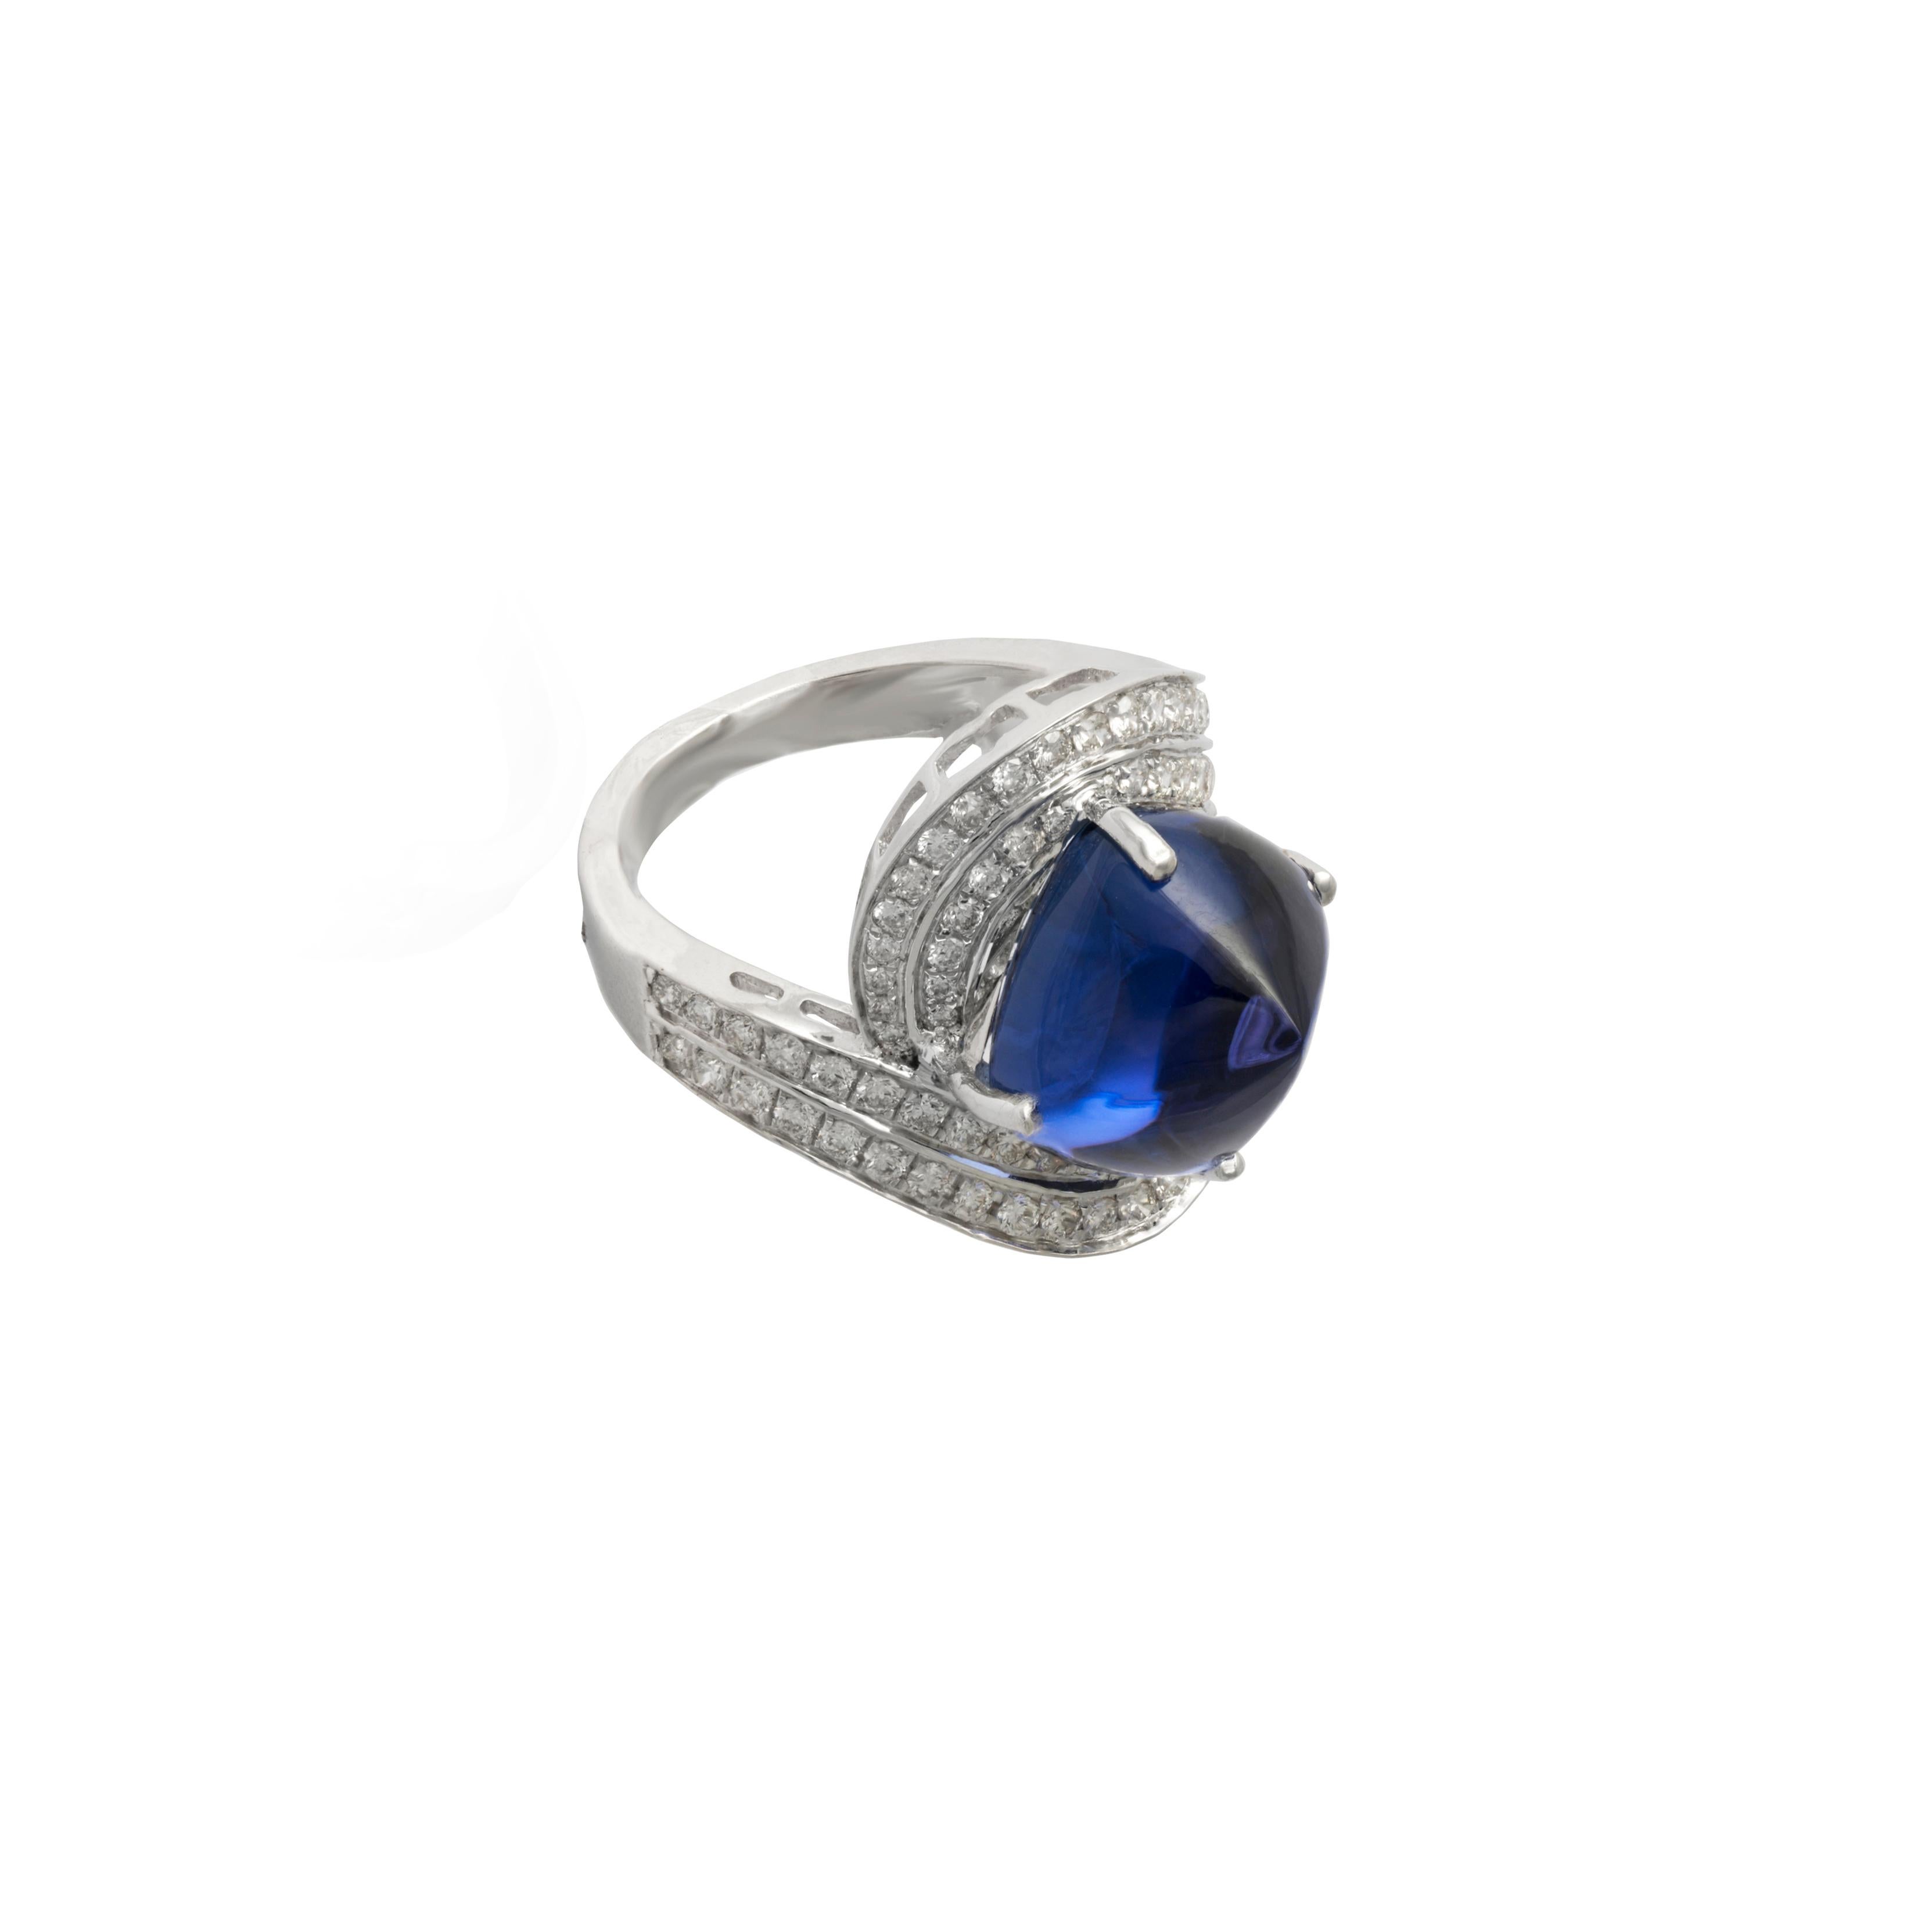 this is a stunning natural tanzanite ring which has cushion shape tanzanite of very good quality and pleasant colour. it has diamonds of vsi quality and G colour

Tanzanite : 11.37 cts
diamonds : 0.96 cts
gold : 5.87 gms

Its very hard to capture